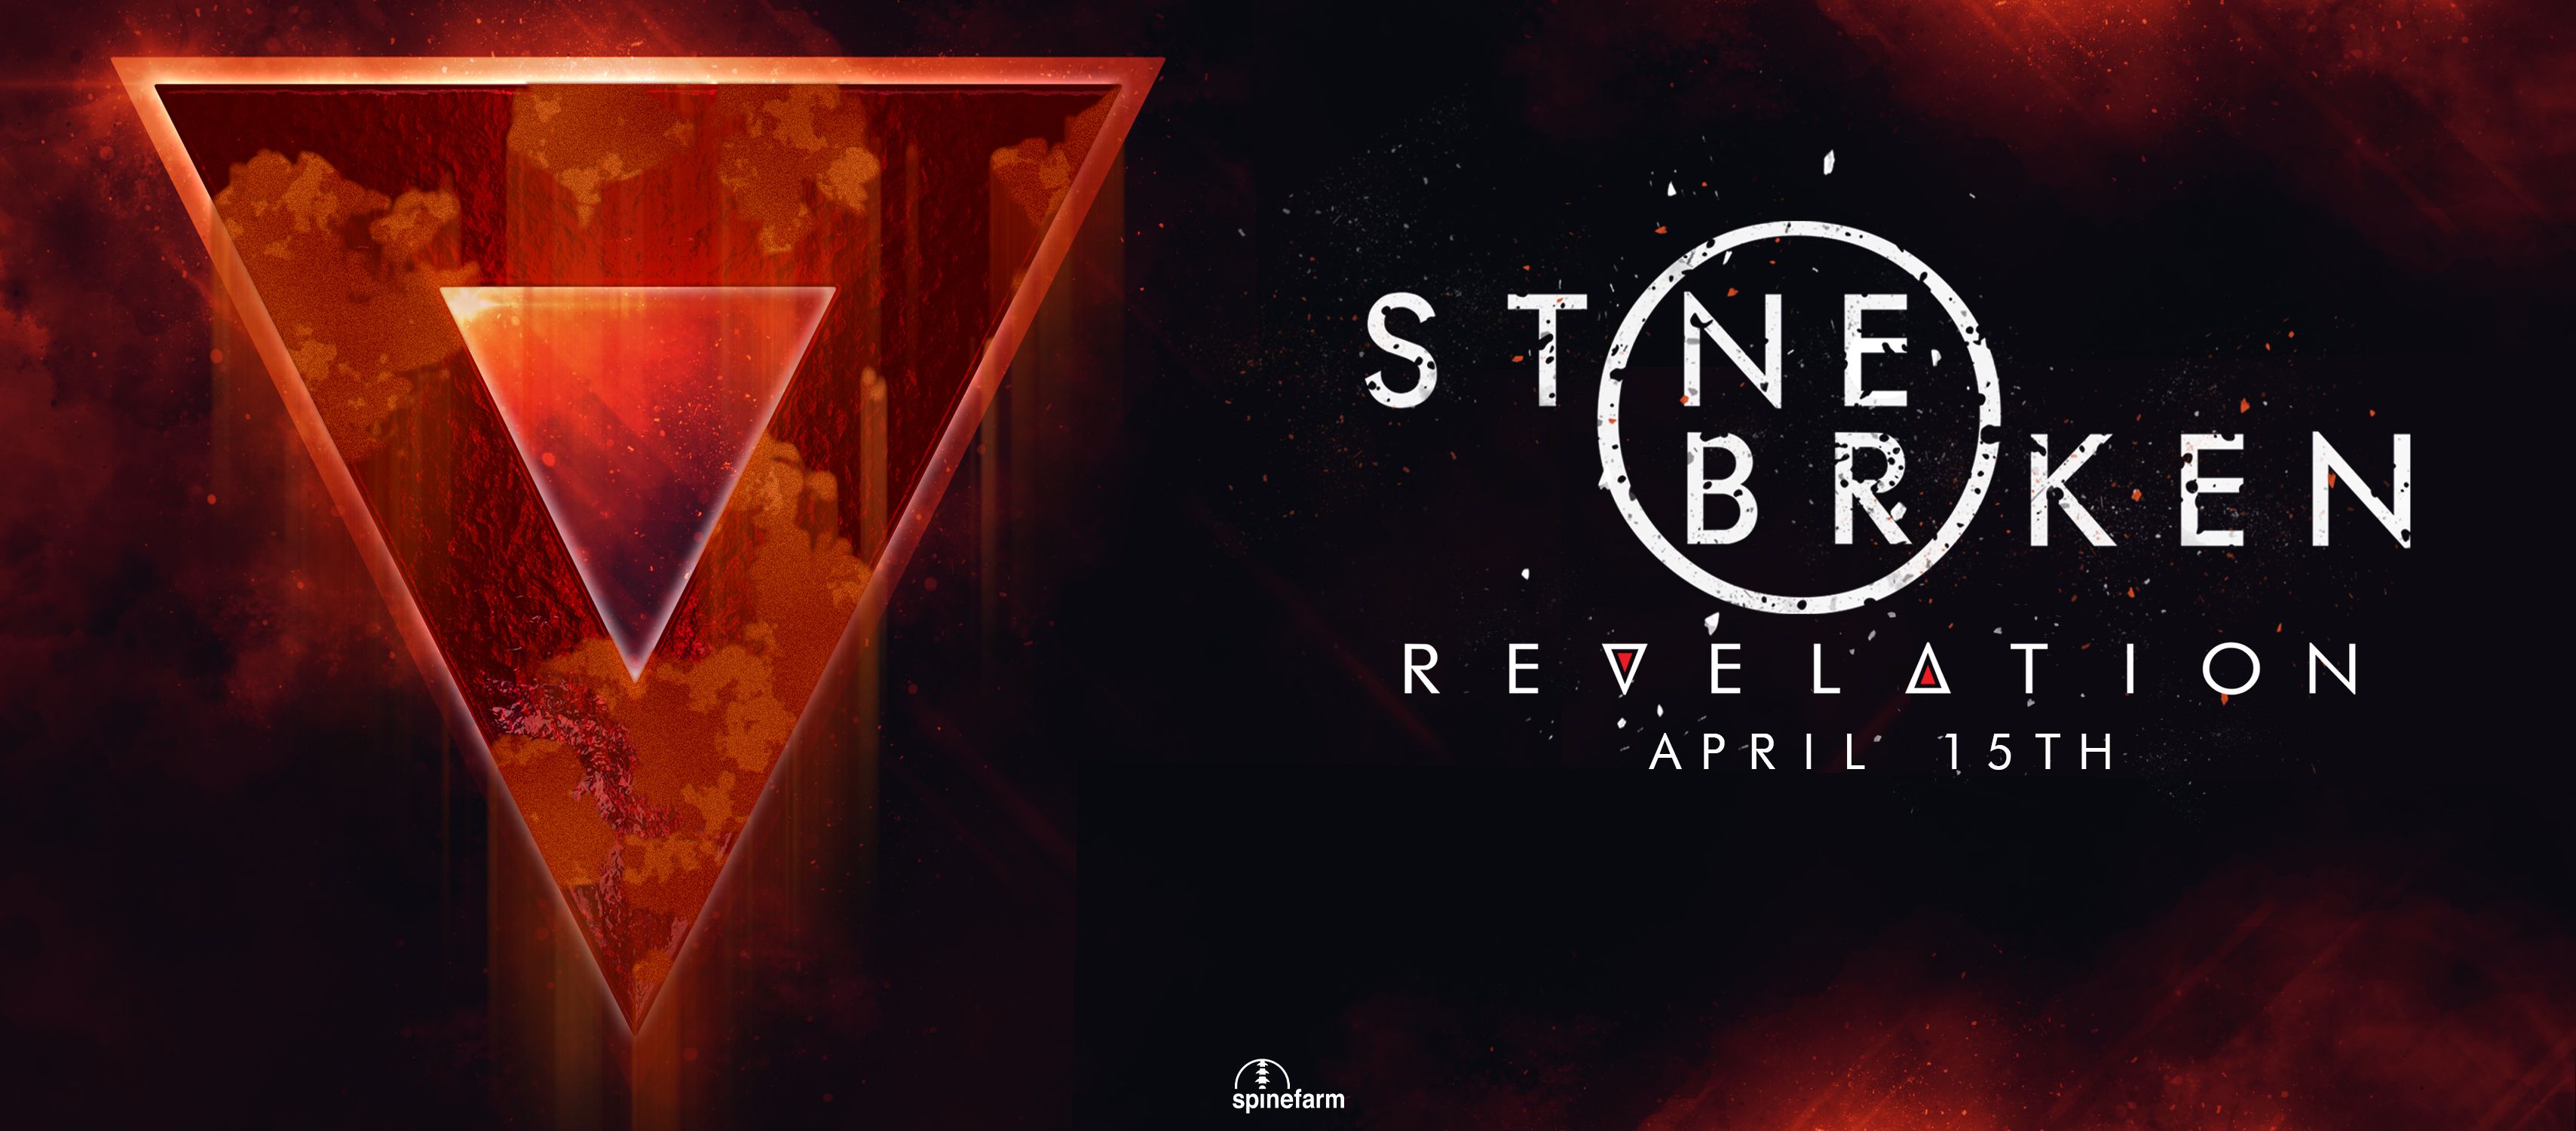 Stone Broken release Deluxe expanded edition of latest studio